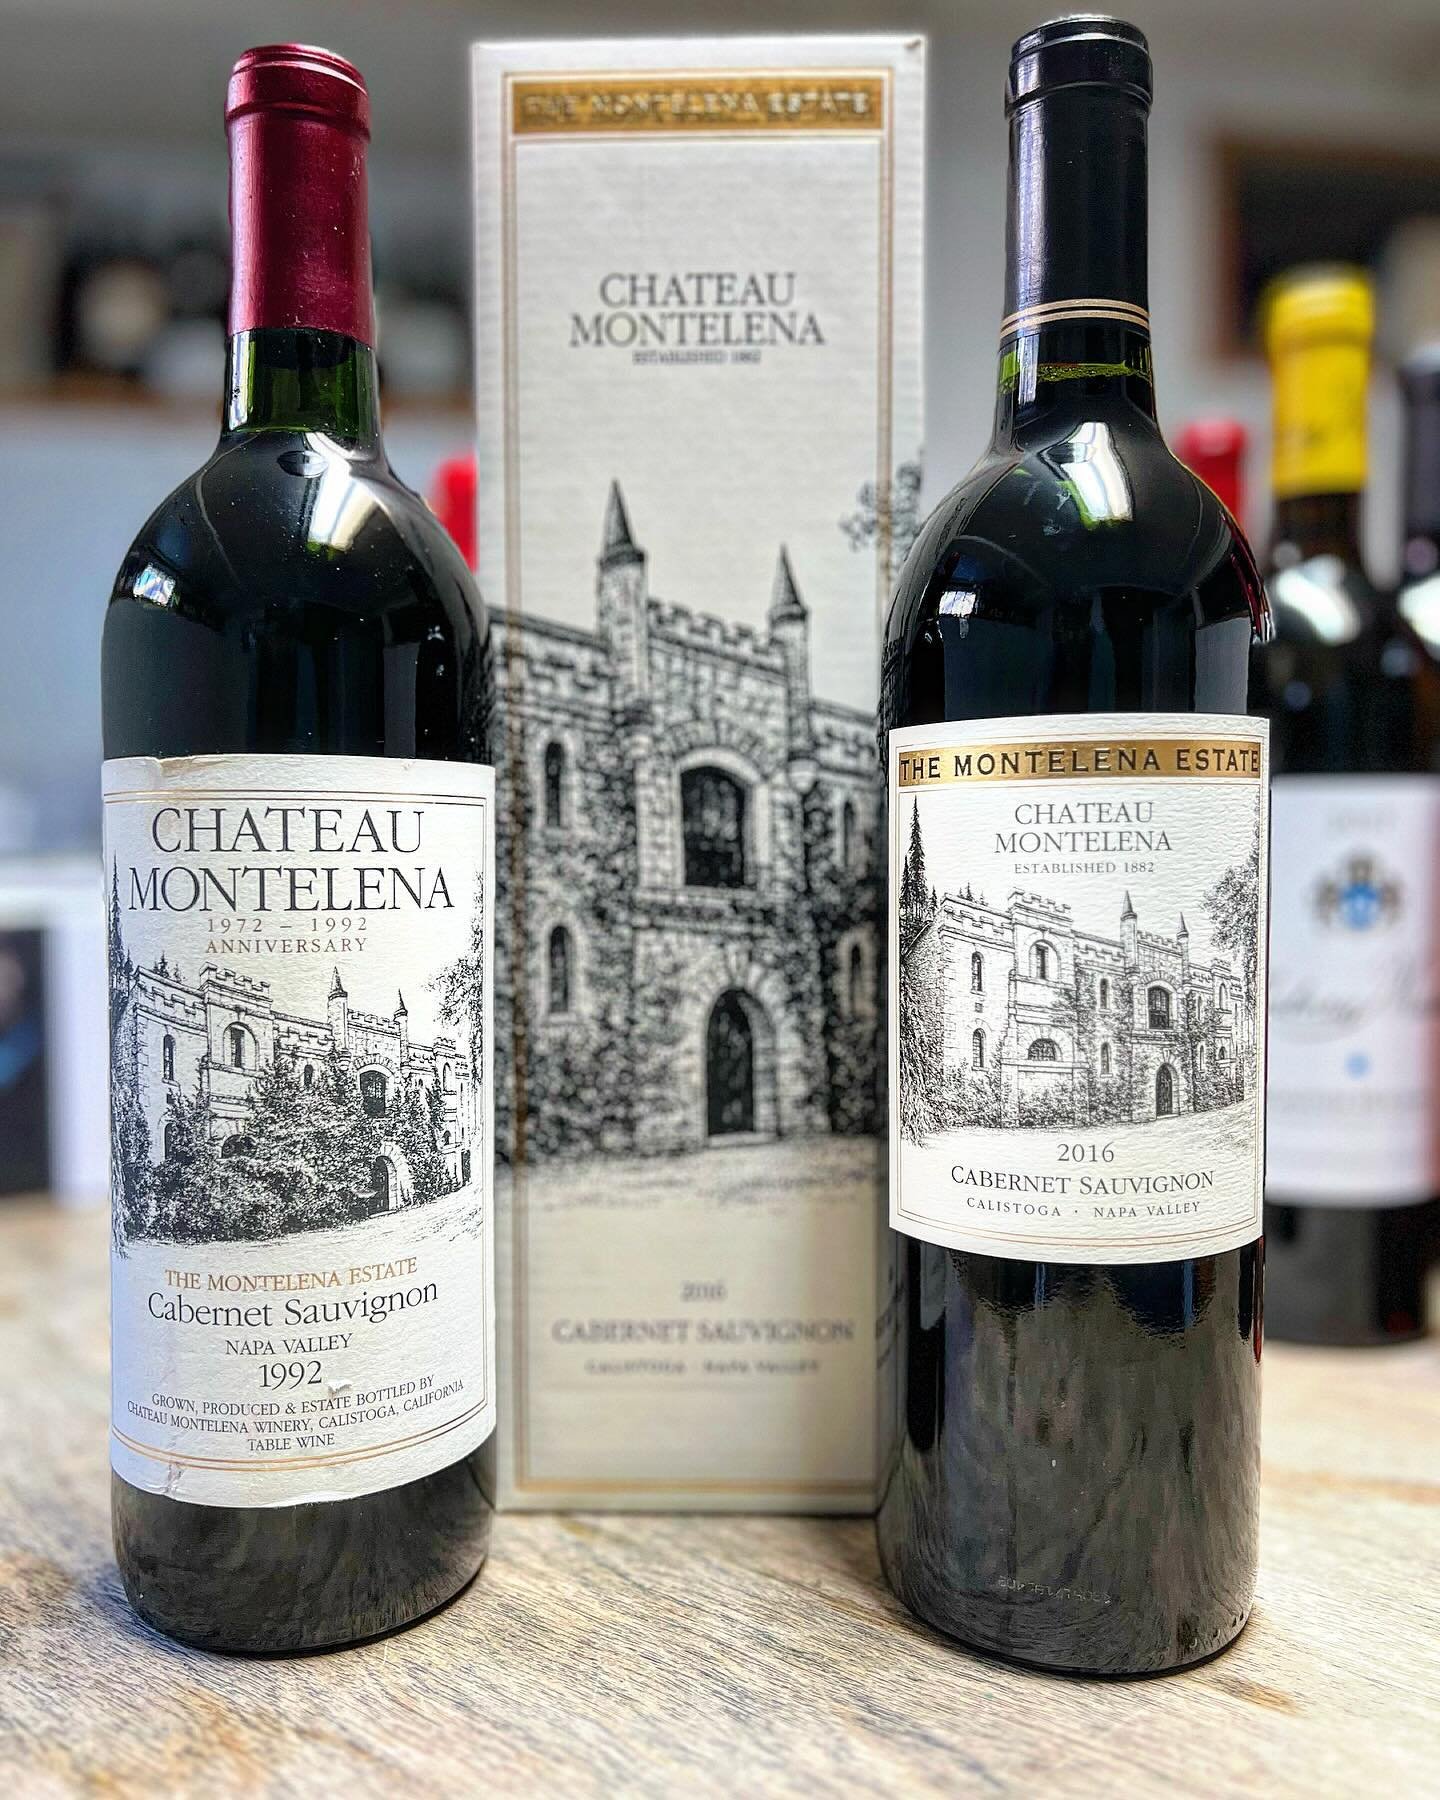 1992 x 2016 Estate Cabernet Sauvignon from @chmontelena 
.
&ldquo;Curious minds are never satisfied&hellip; At Montelena, we question everything &mdash; convention, past methodologies, or how we can do something just a little bit better.&ldquo; - The